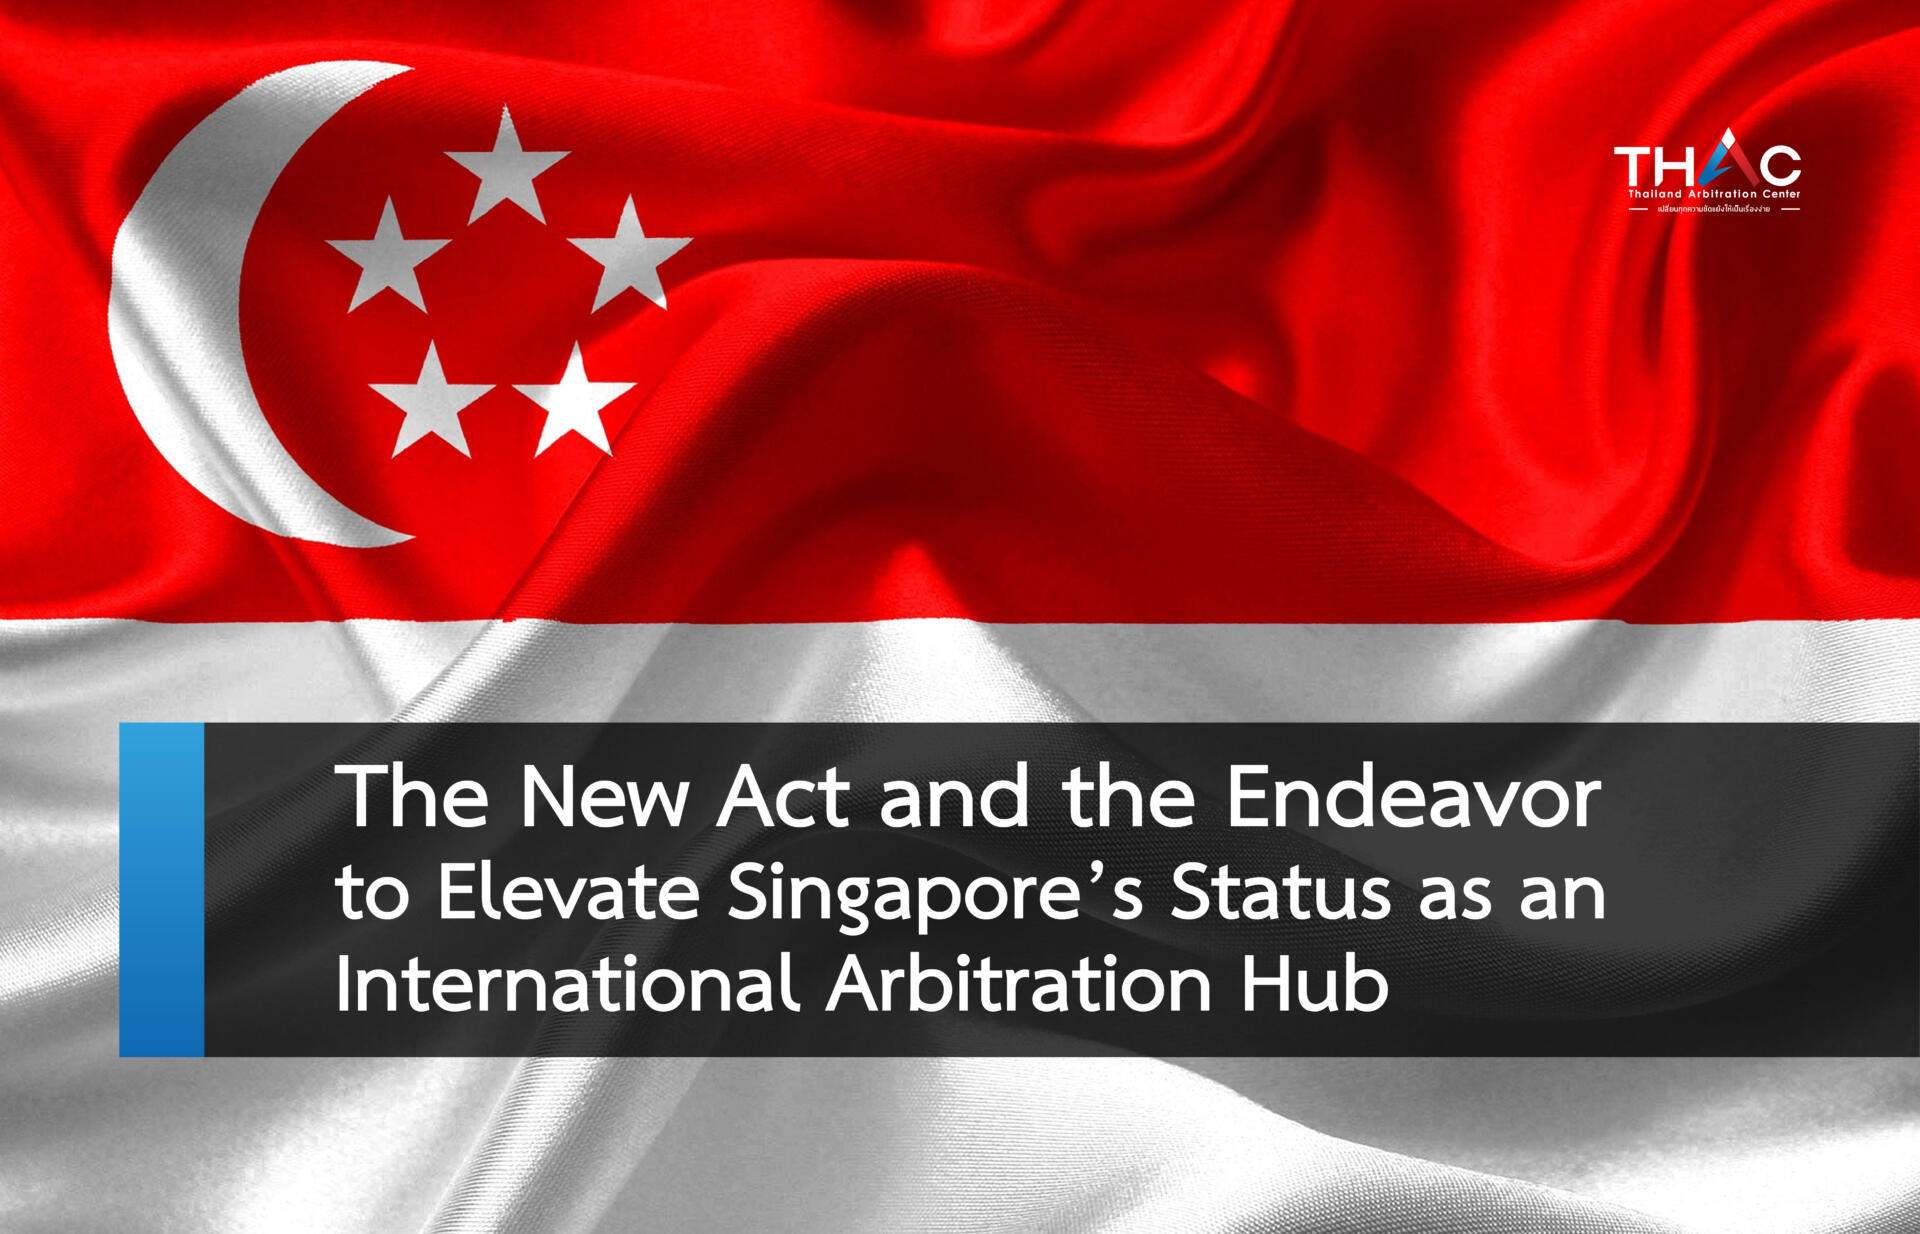 The New Act and the Endeavor to Elevate Singapore’s Status as an